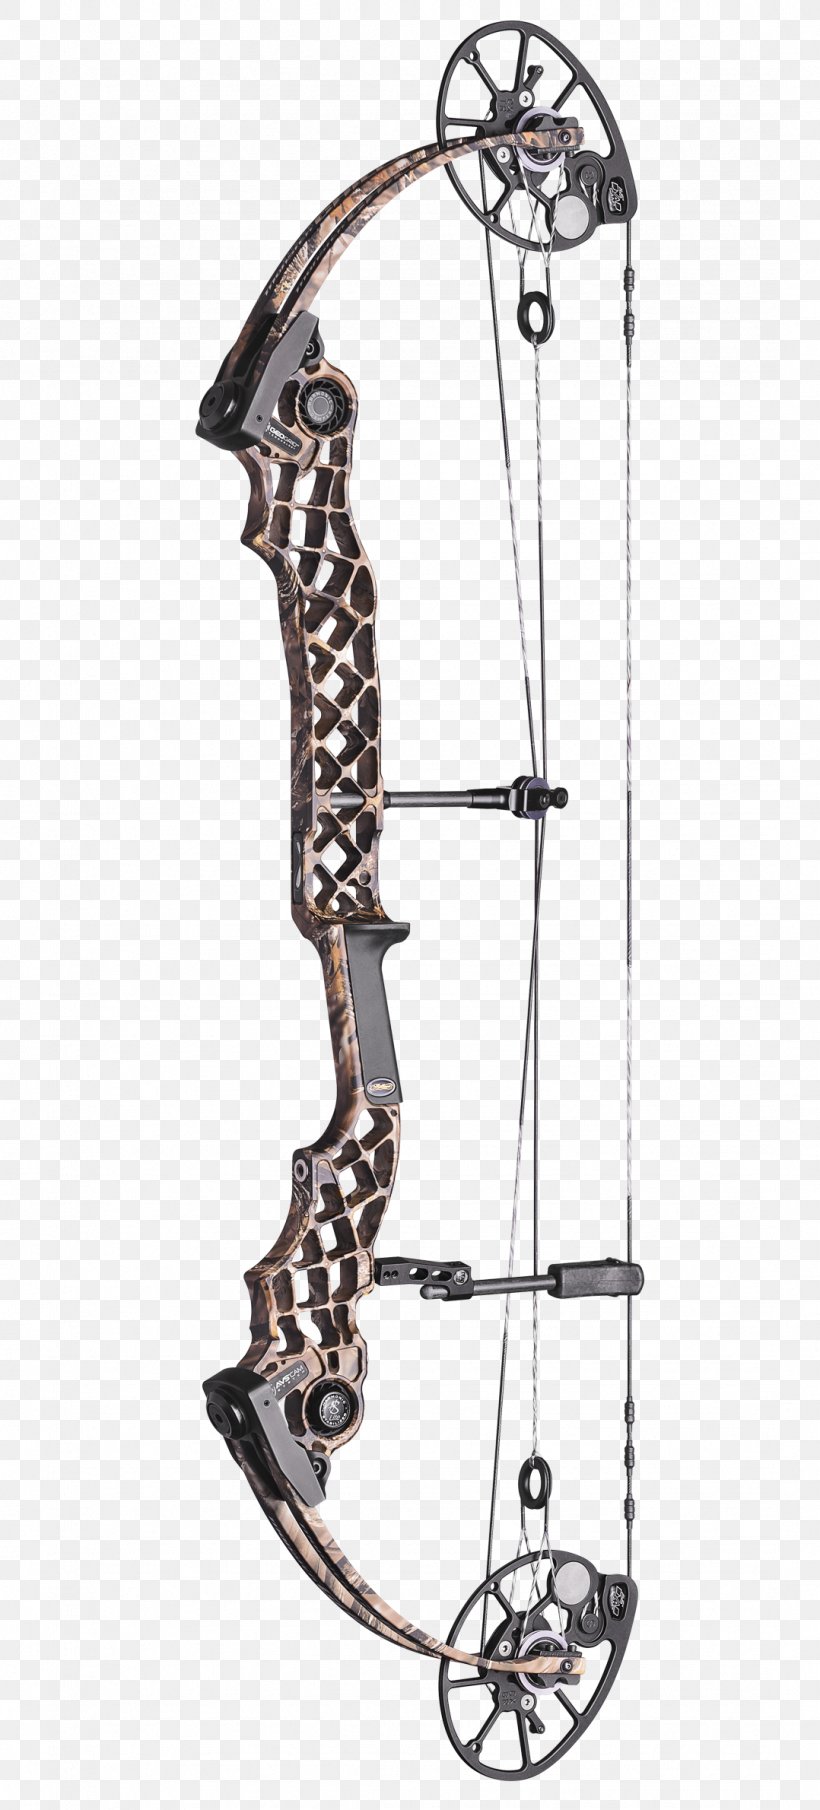 Bow And Arrow Compound Bows Archery Bowhunting Shooting Sport, PNG, 1078x2380px, Bow And Arrow, Archery, Bear Archery, Bow, Bowhunting Download Free